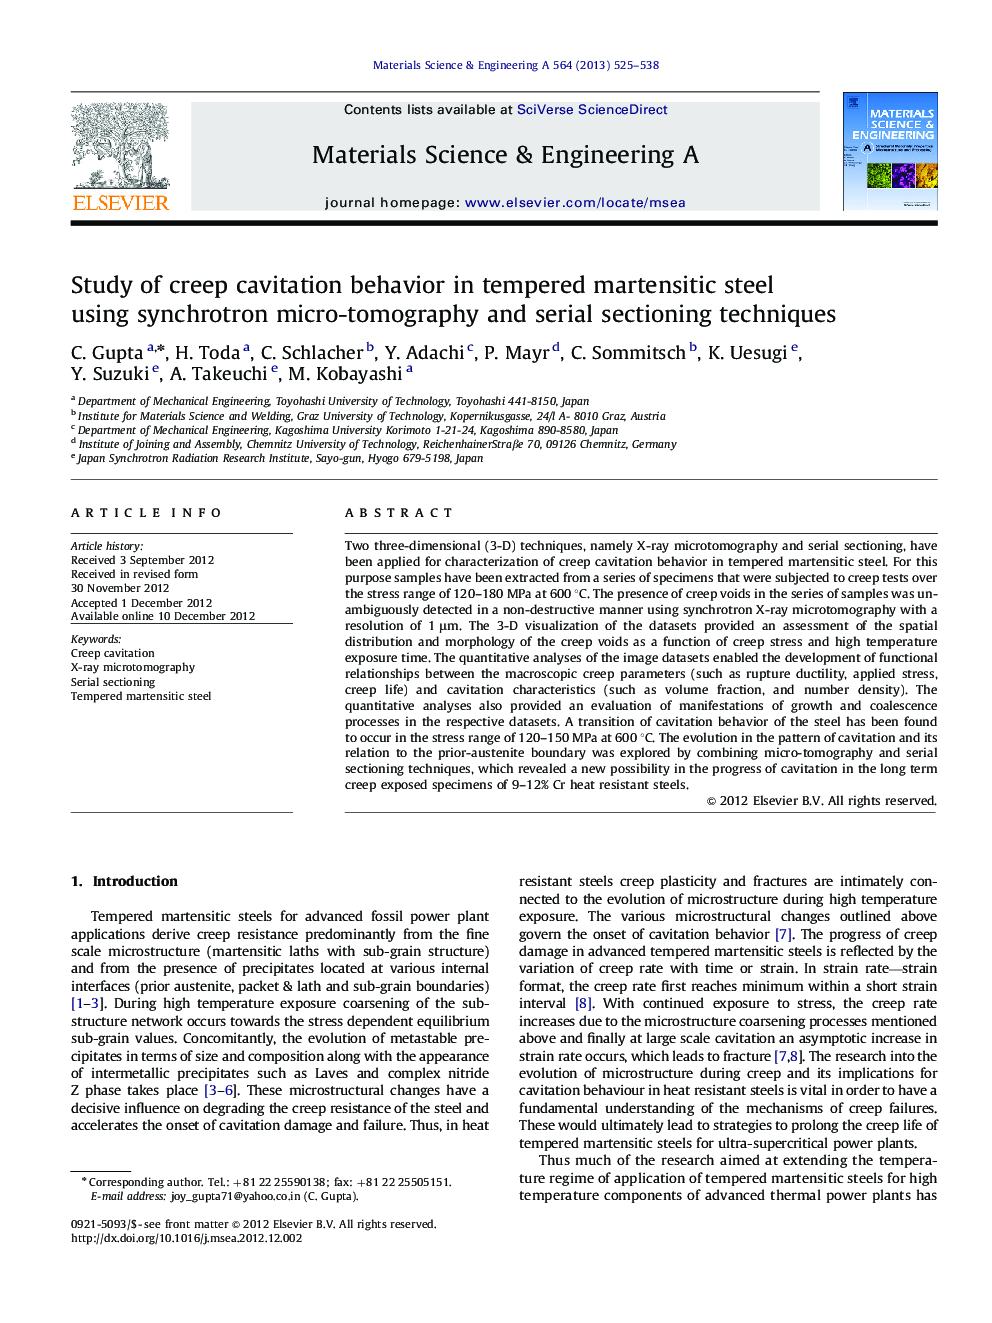 Study of creep cavitation behavior in tempered martensitic steel using synchrotron micro-tomography and serial sectioning techniques